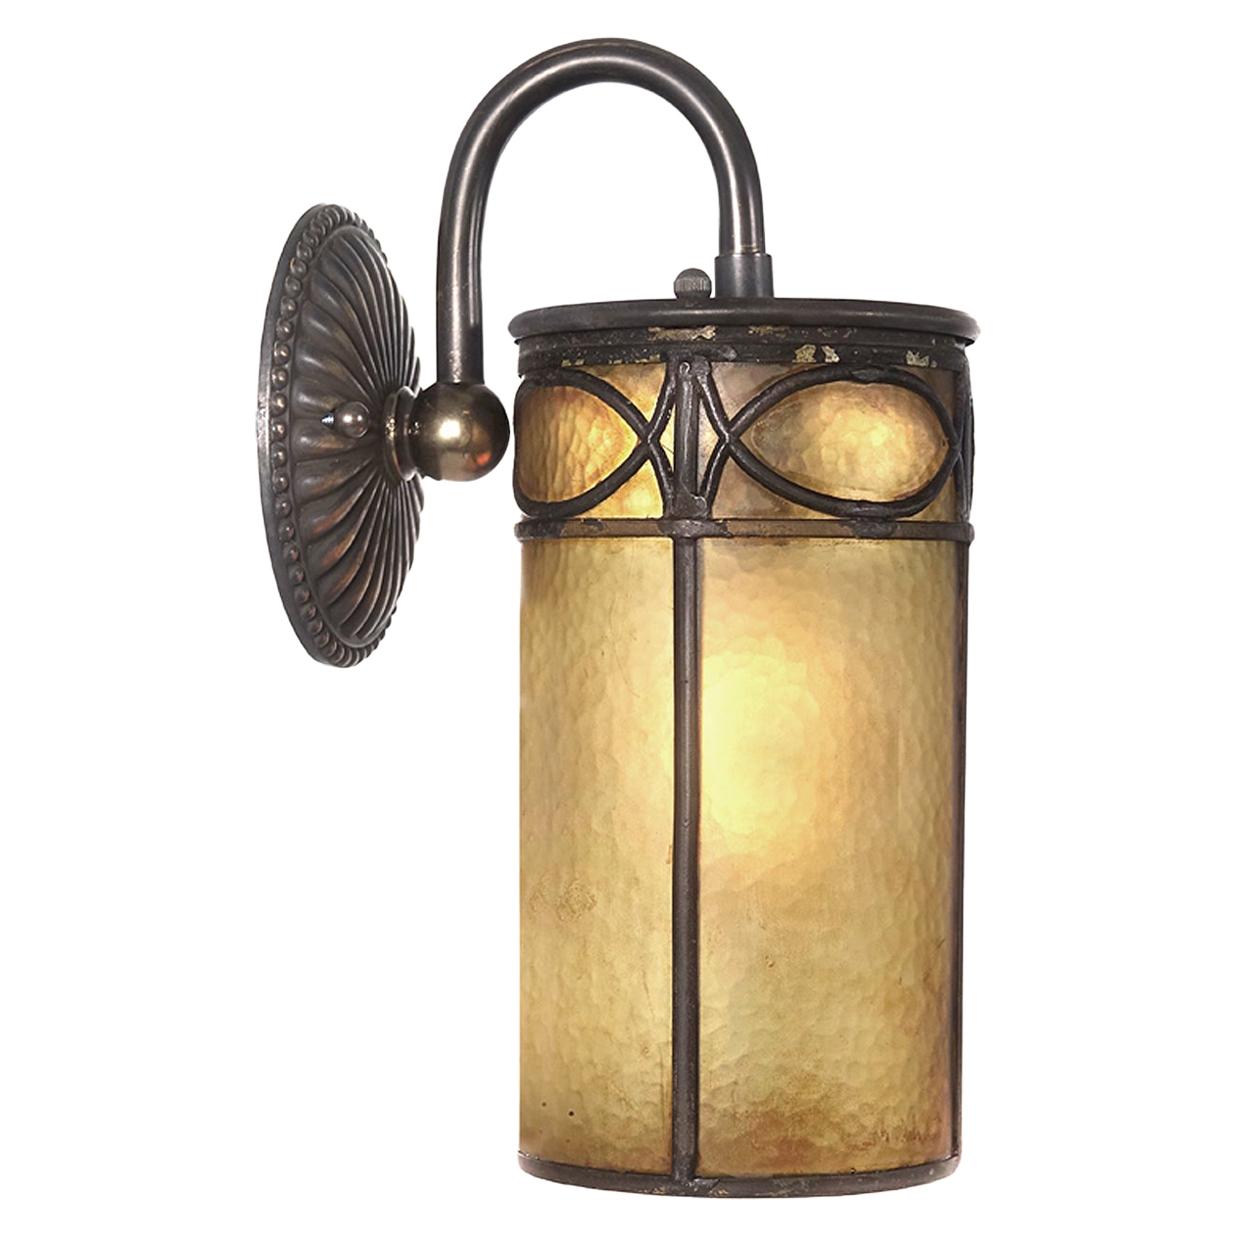 Medieval Wall Lights and Sconces - 26 For Sale at 1stDibs 